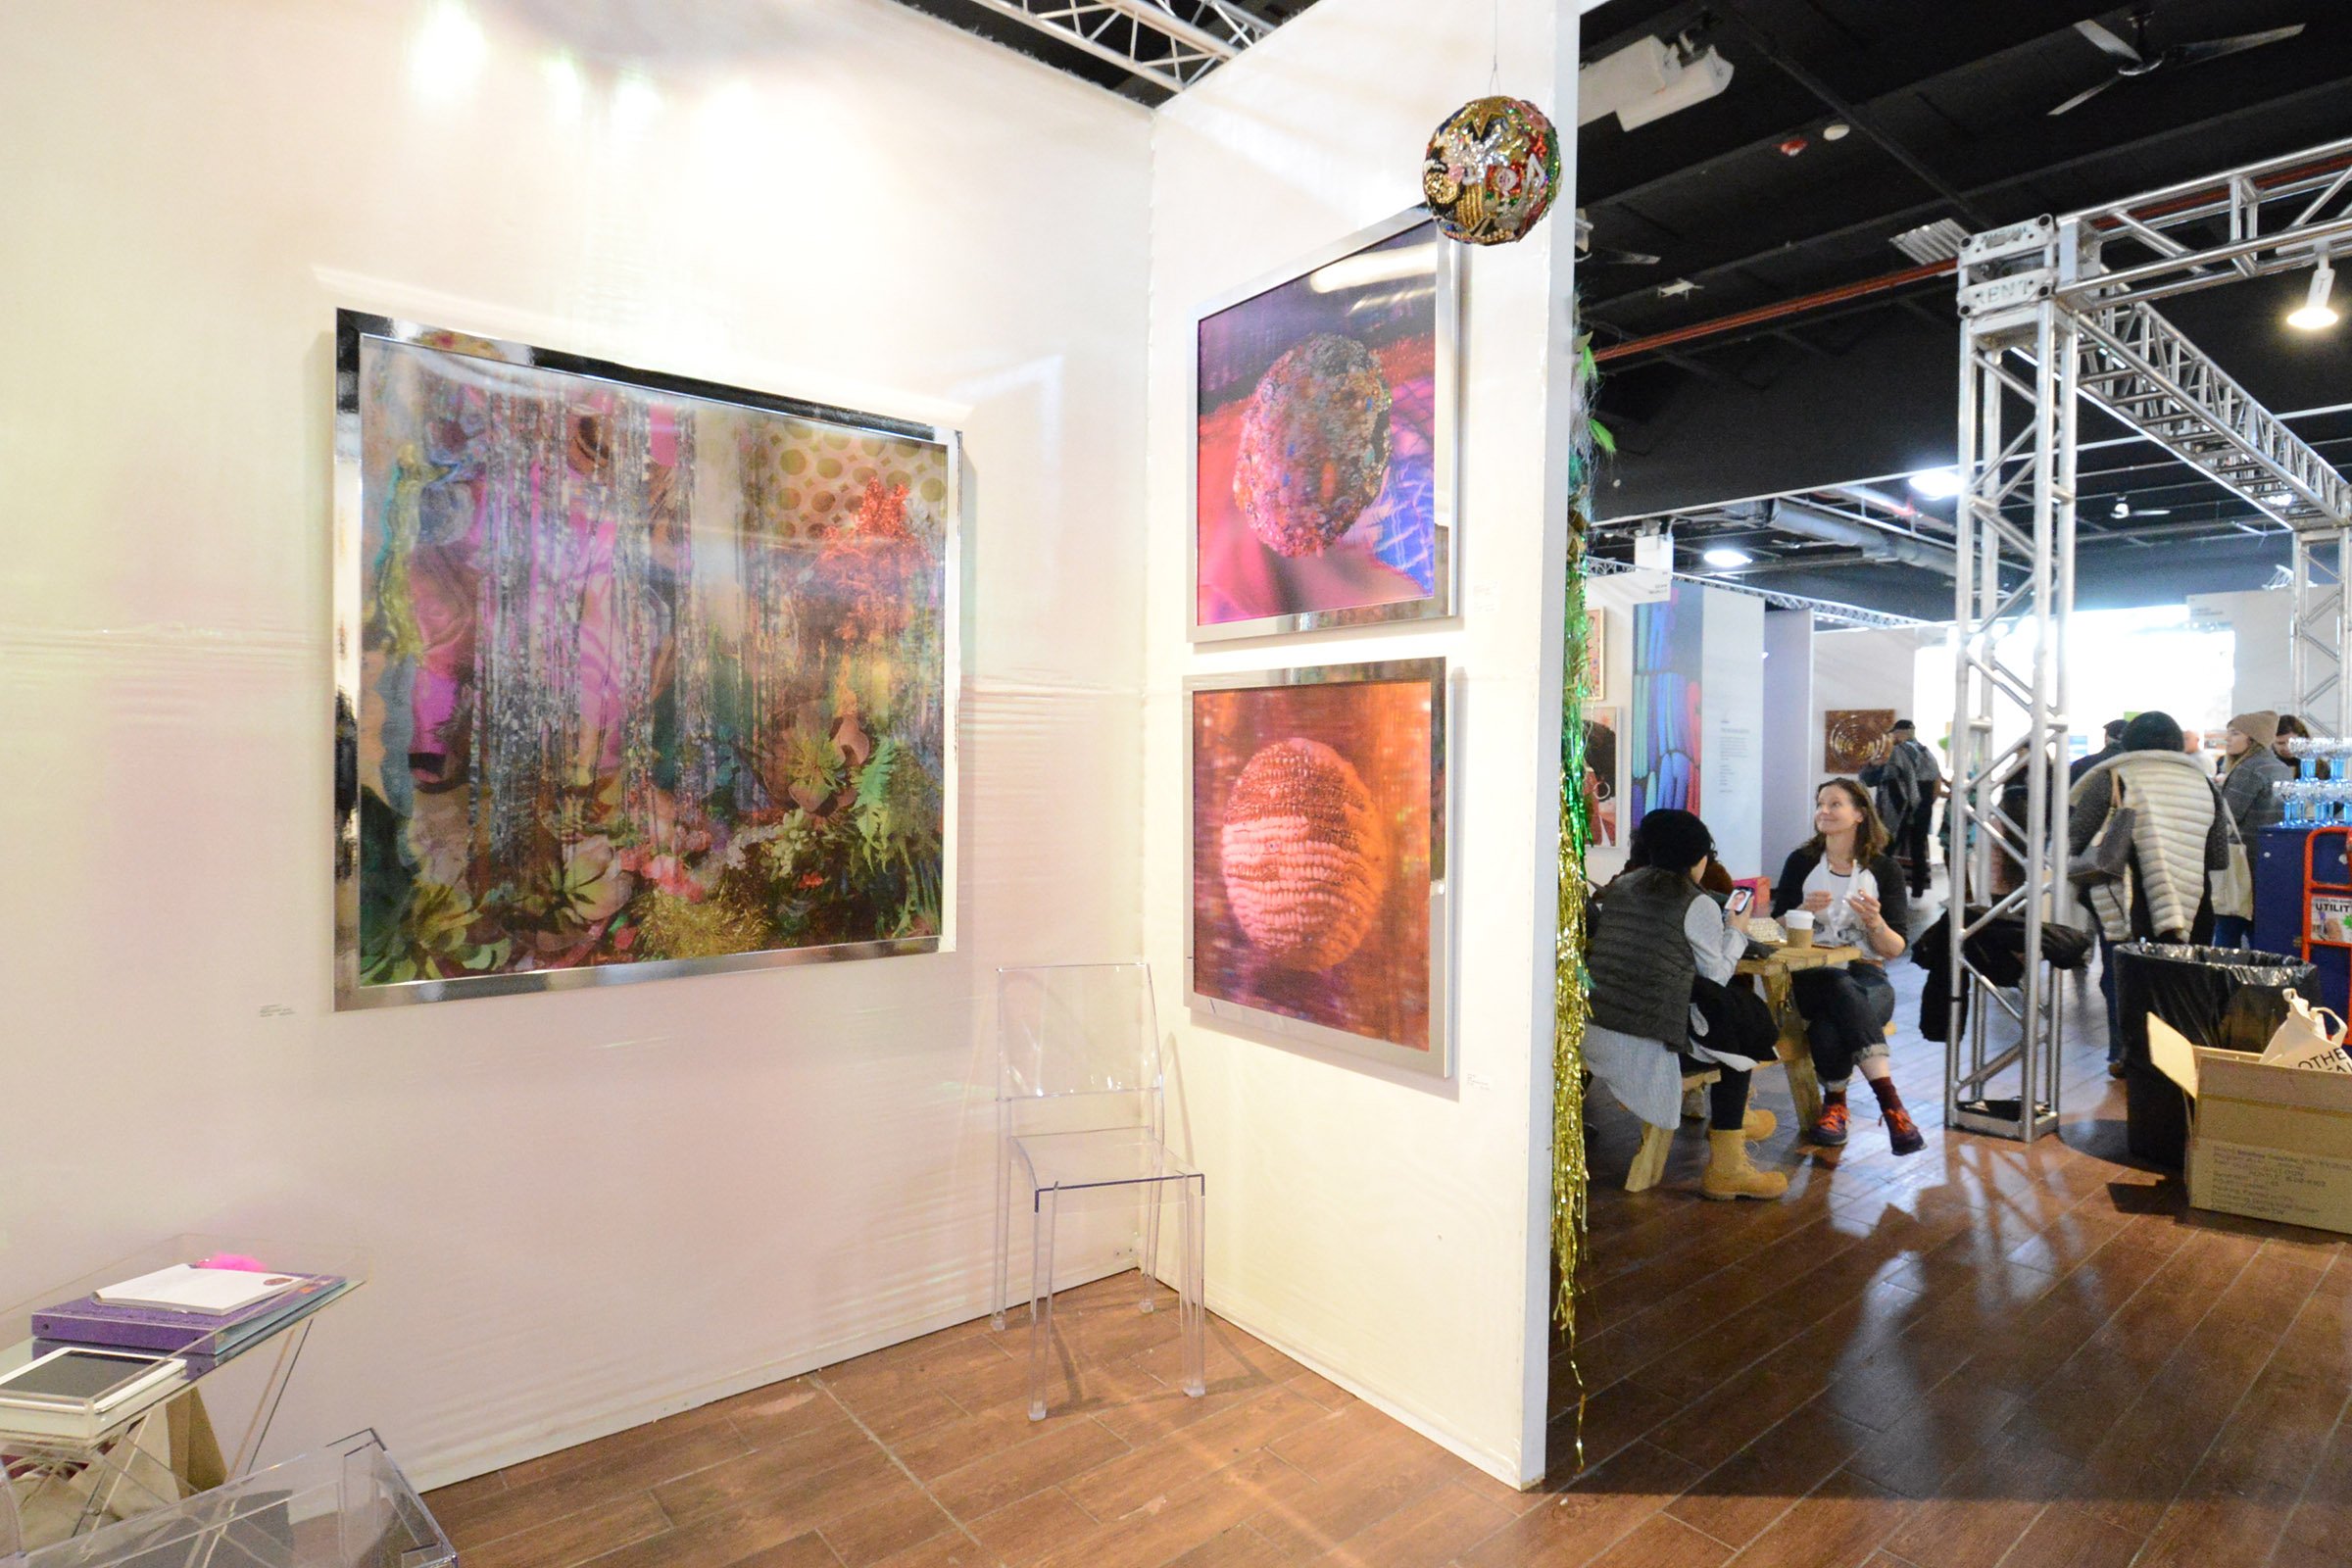  Installation image of “Orb I” &amp; “Orb II” in my booth at the Other Art Fair 2019 